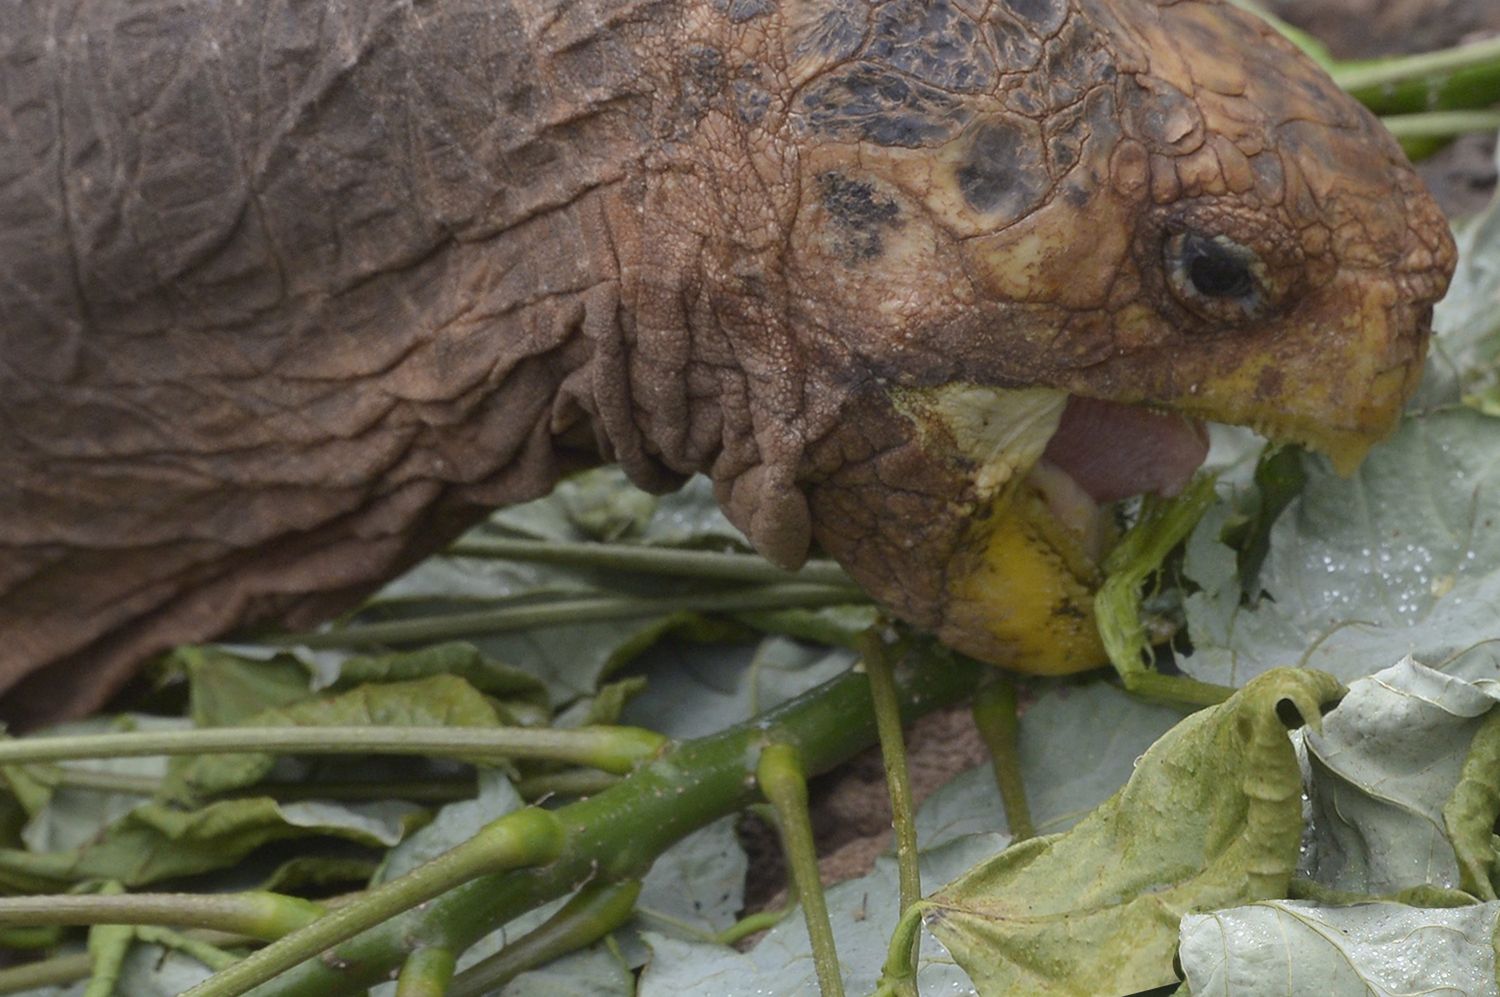 Diego, a tortoise of the endangered Chelonoidis hoodensis subspecies from Espa��ola Island, is seen in a breeding centre at the Galapagos National Park on Santa Cruz Island in the Galapagos archipelago, located some 1,000 km off Ecuador's coast, on September 10, 2016. / AFP PHOTO / RODRIGO BUENDIA